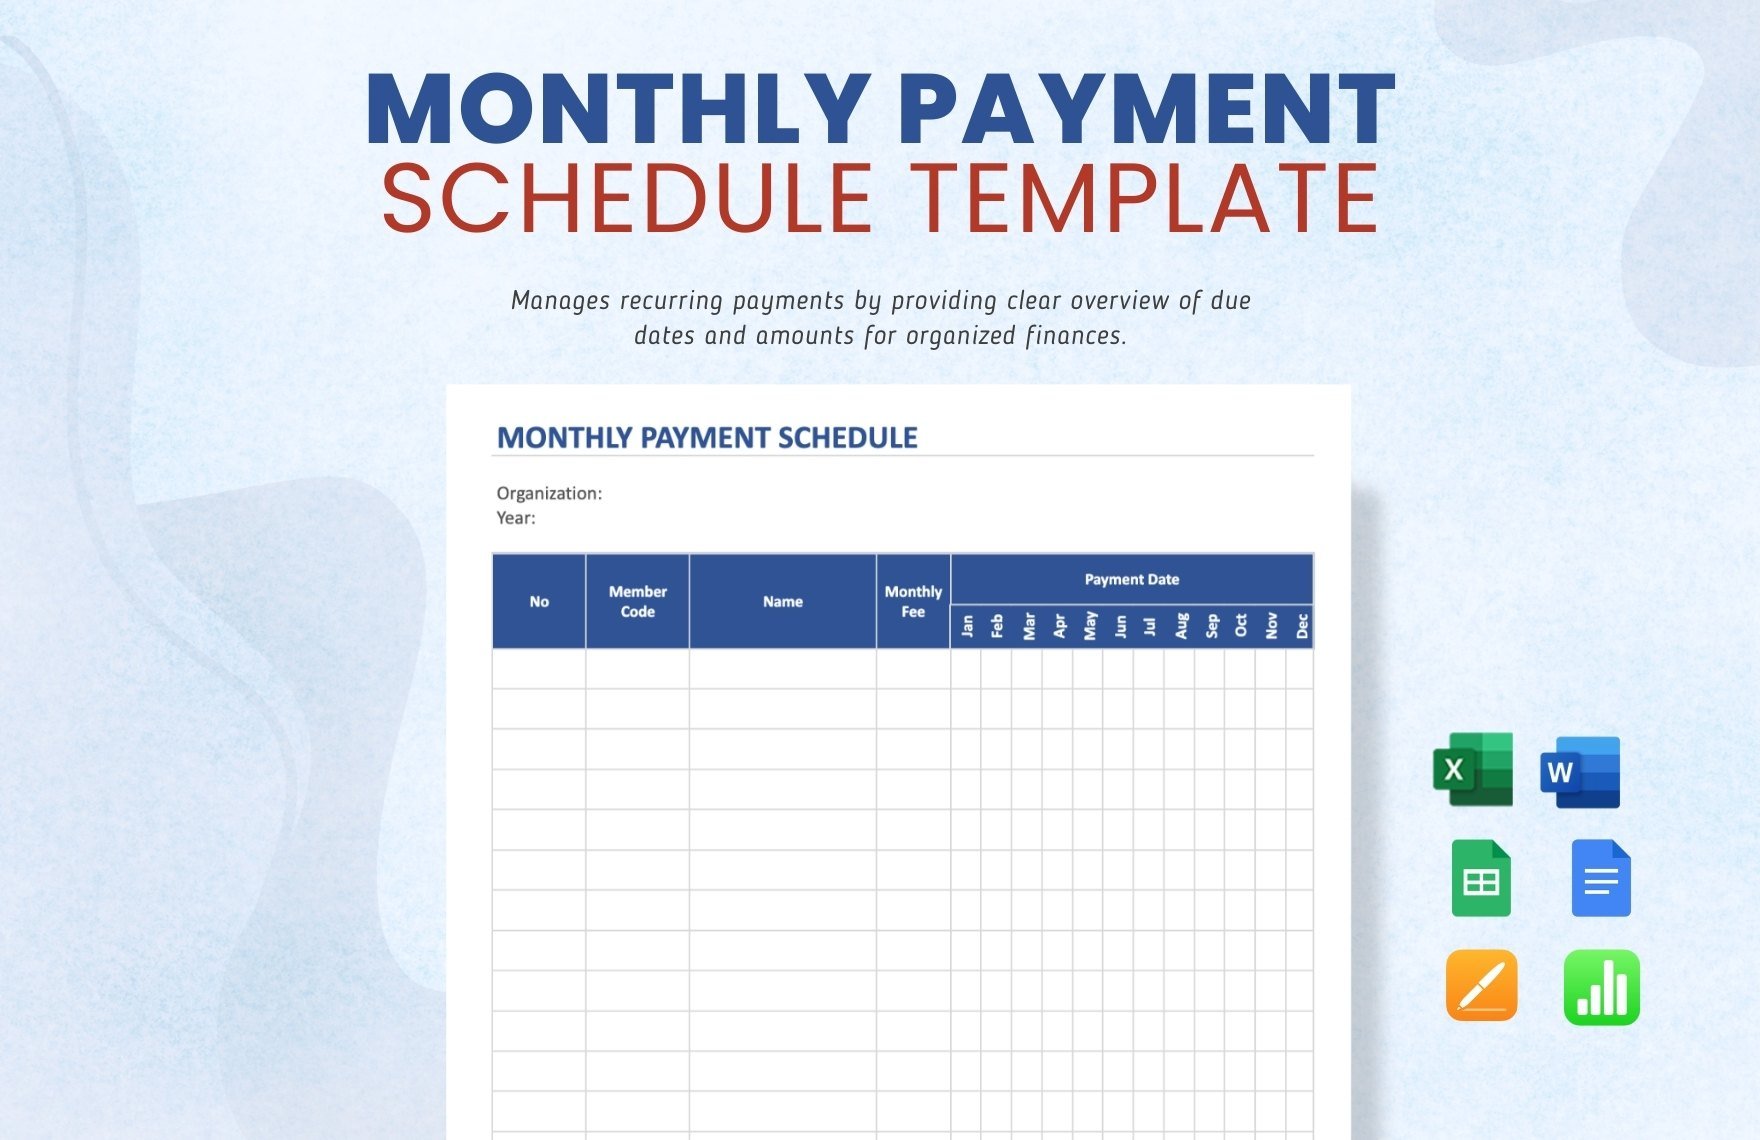 Monthly Payment Schedule Template in Word, Google Docs, Excel, Google Sheets, Apple Pages, Apple Numbers